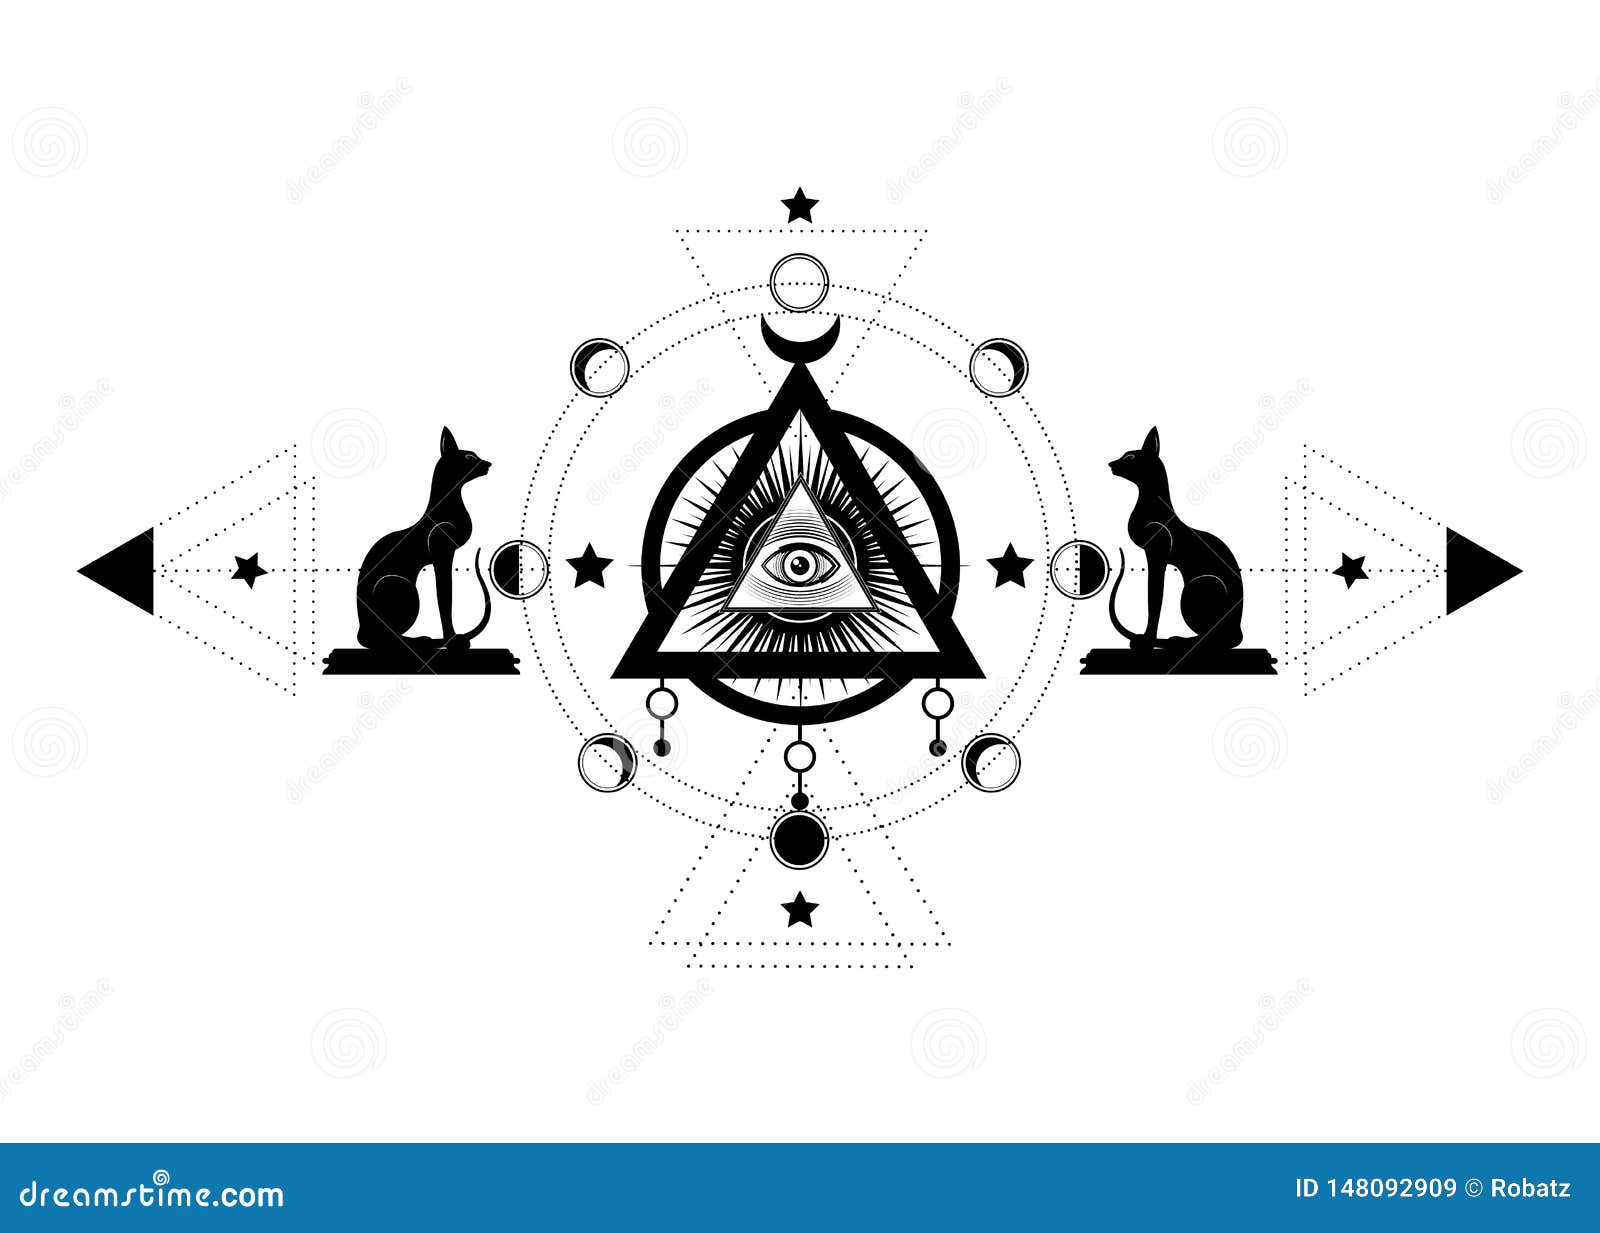 mystical drawing: the third eye, all-seeing eye, circle of a moon phase. sacred geometry and egyptian cats bastet ancient egypt